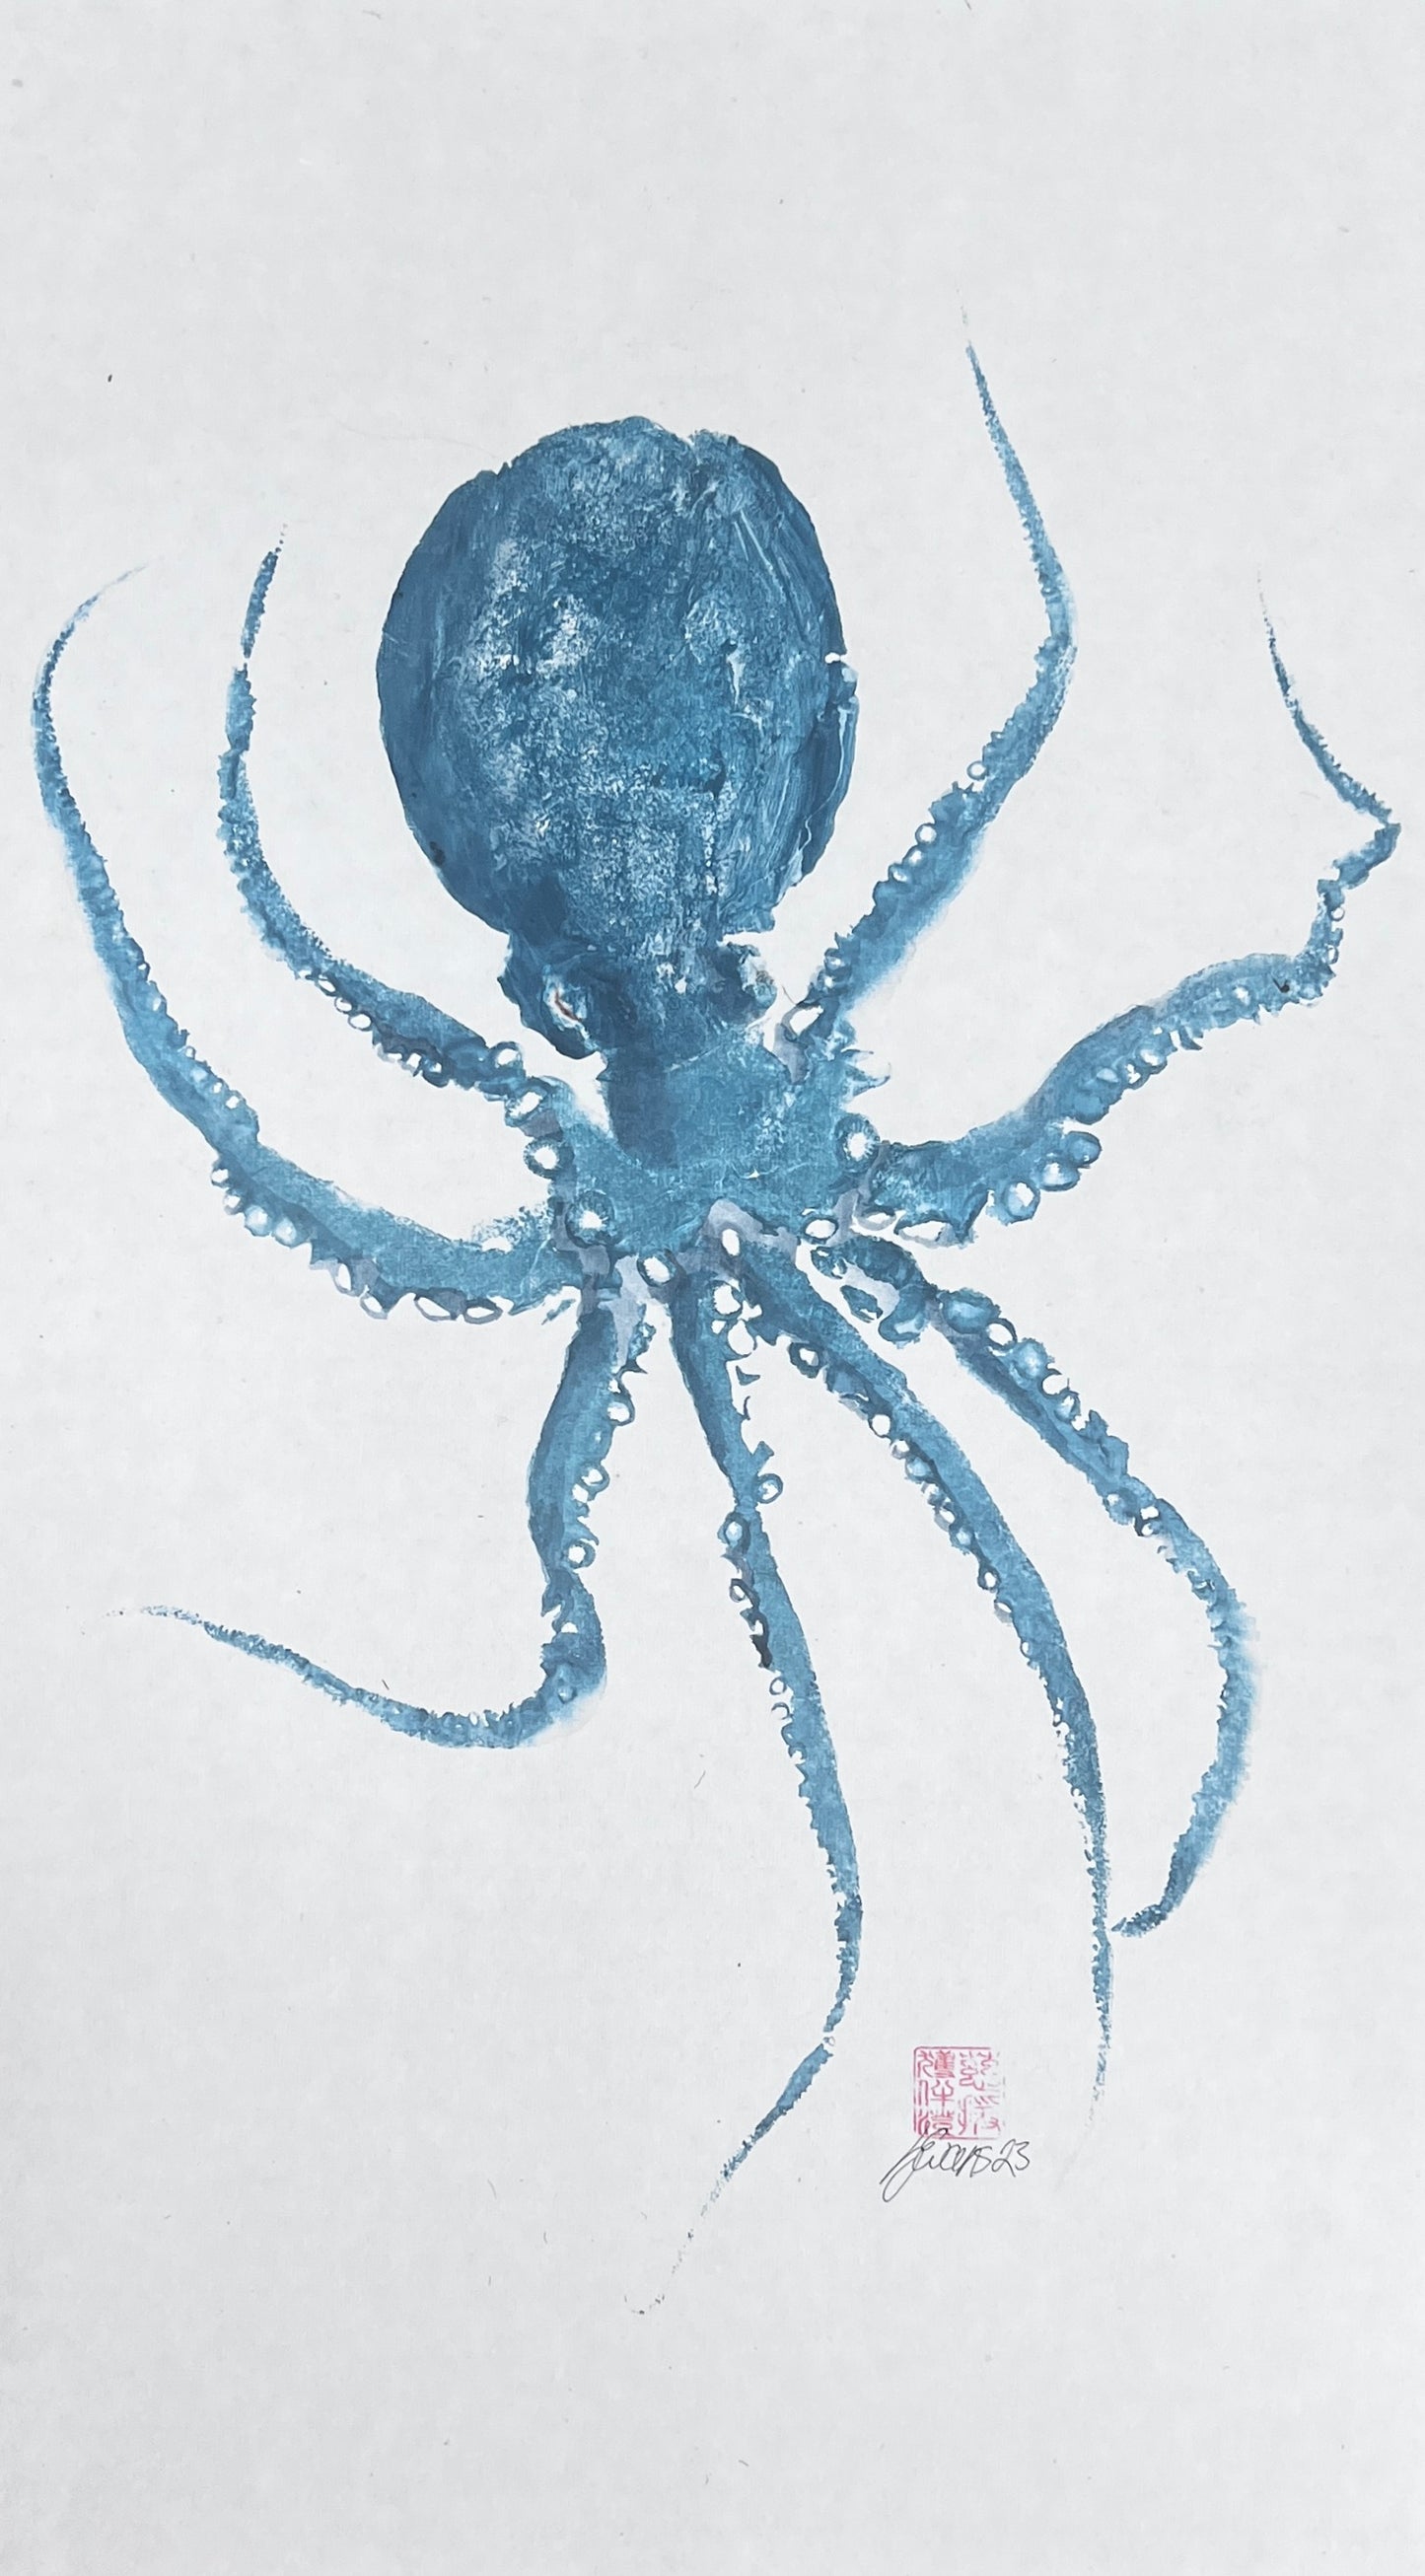 Gyotaku impression from the surface of an Octopus in blue